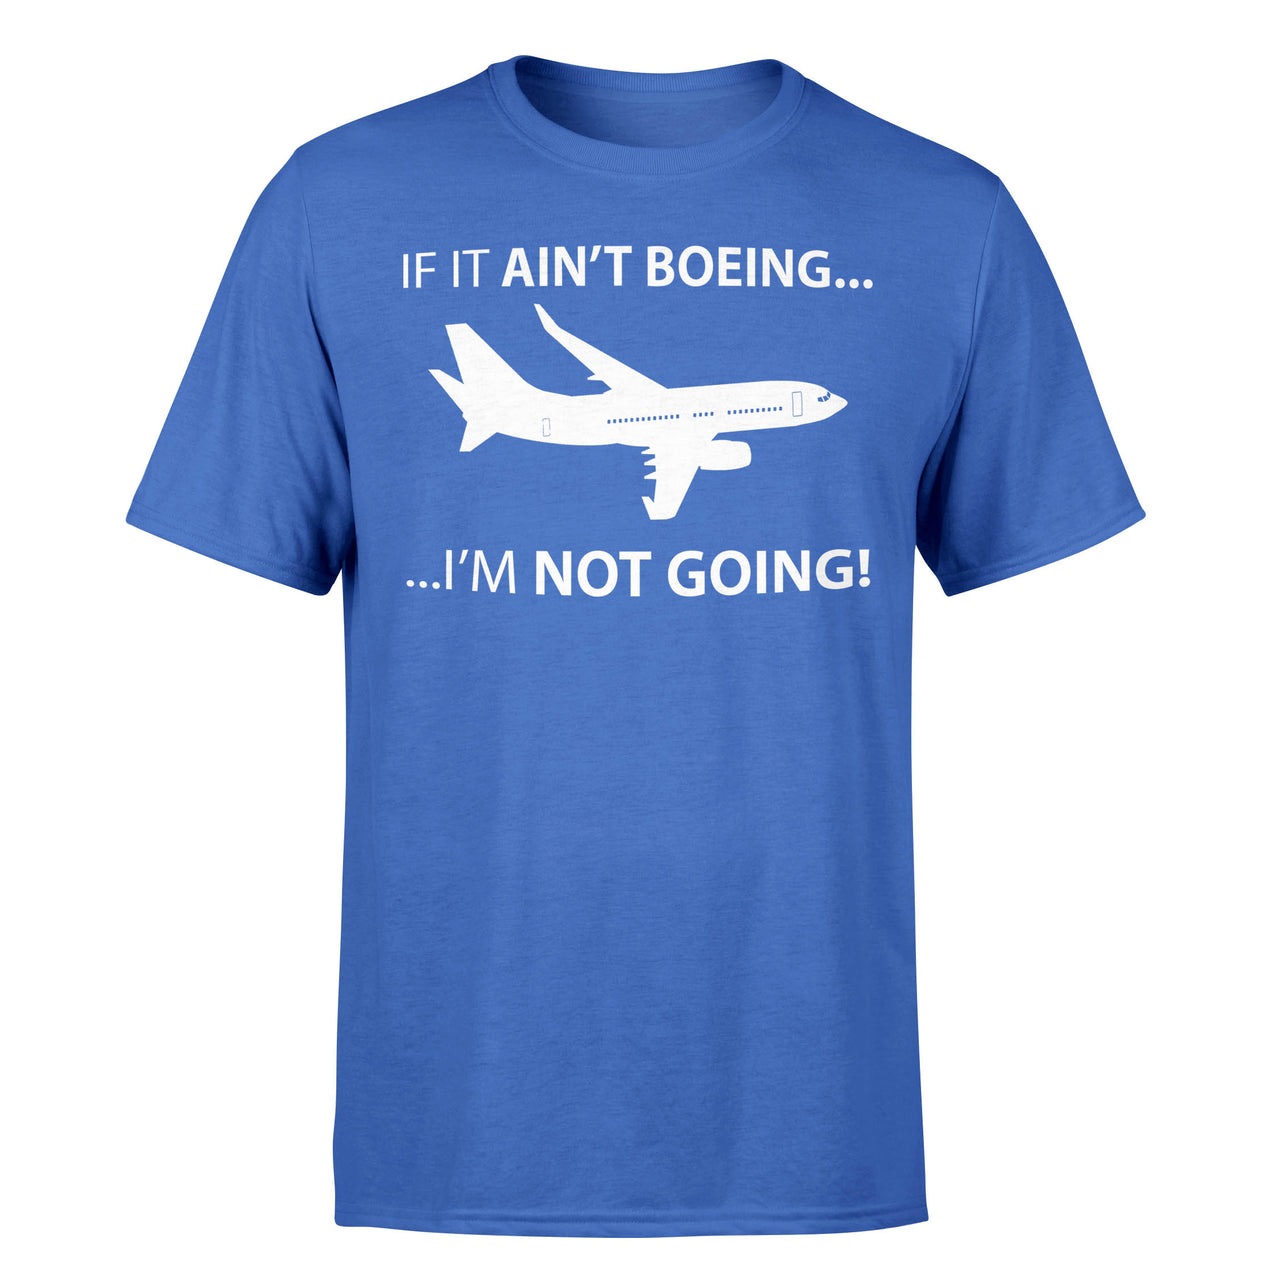 If It Ain't BOEING, I am NOT GOING Designed T-Shirts